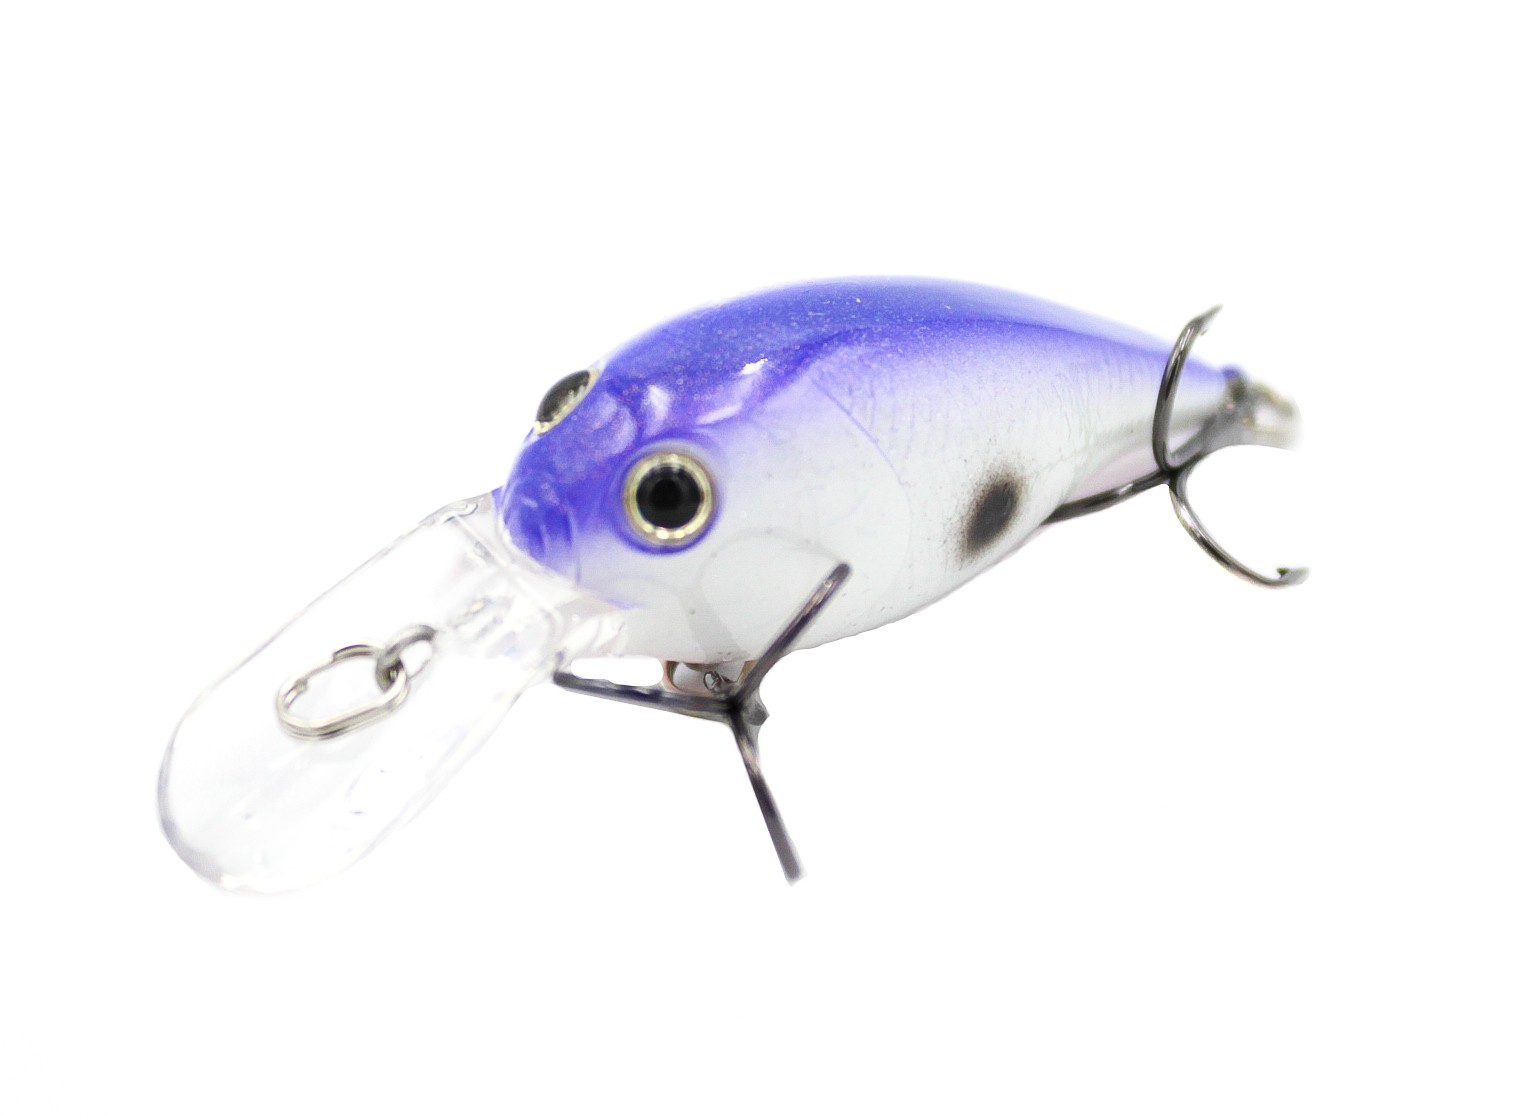 Воблер Lucky Craft Bevy crank 45 DR 261 table rock shad - фото 1